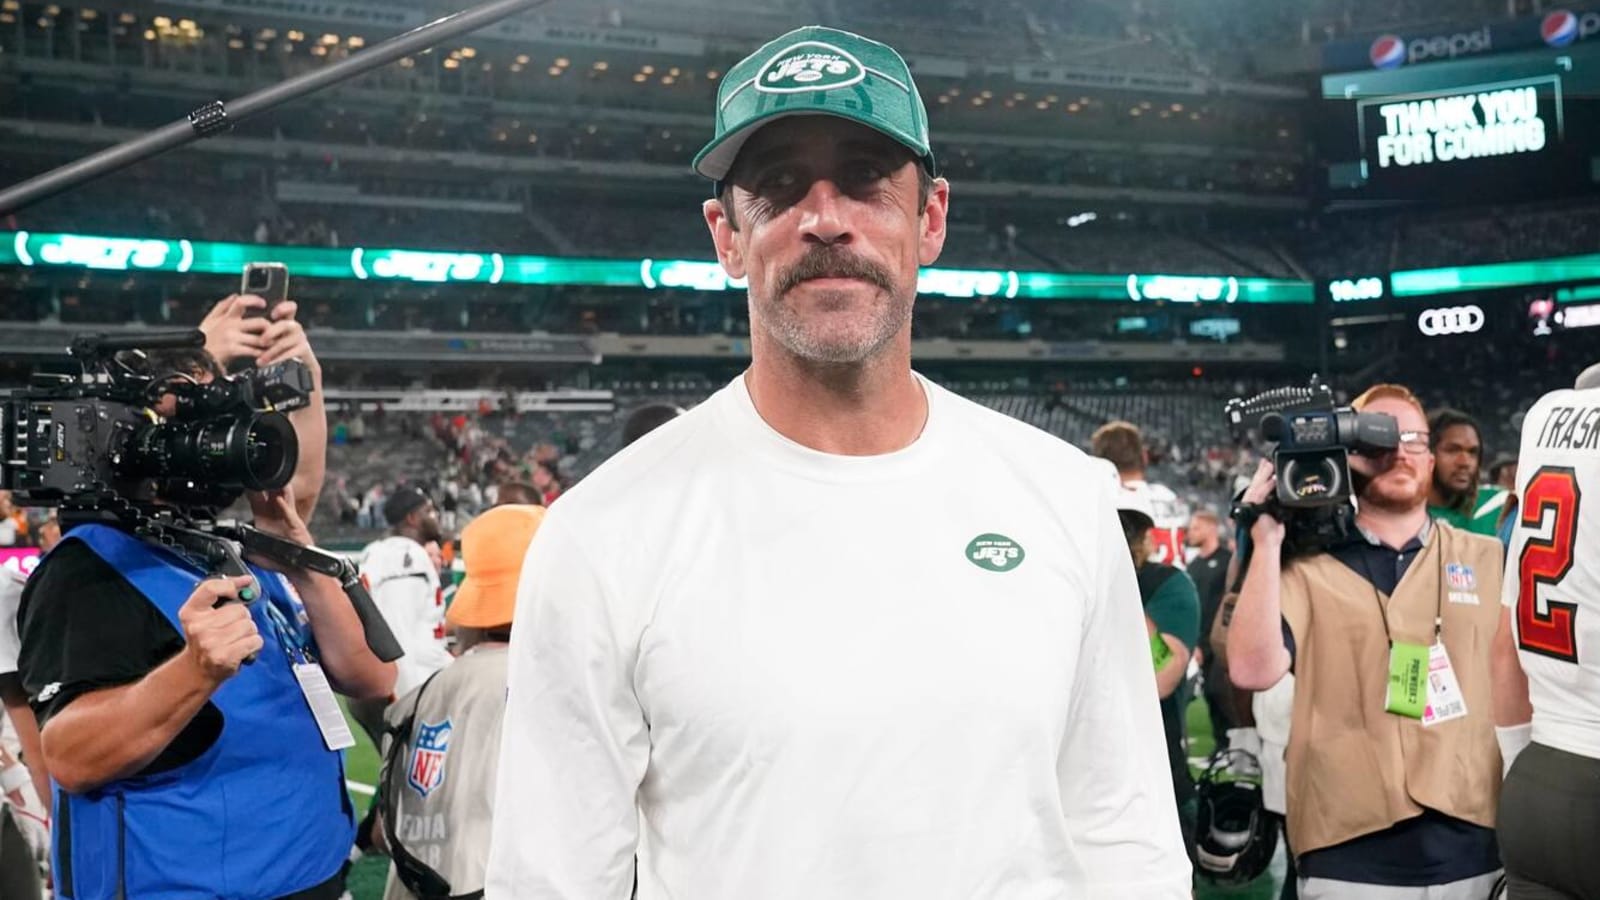 Former MVP blasts Jets over giving Aaron Rodgers 'power'